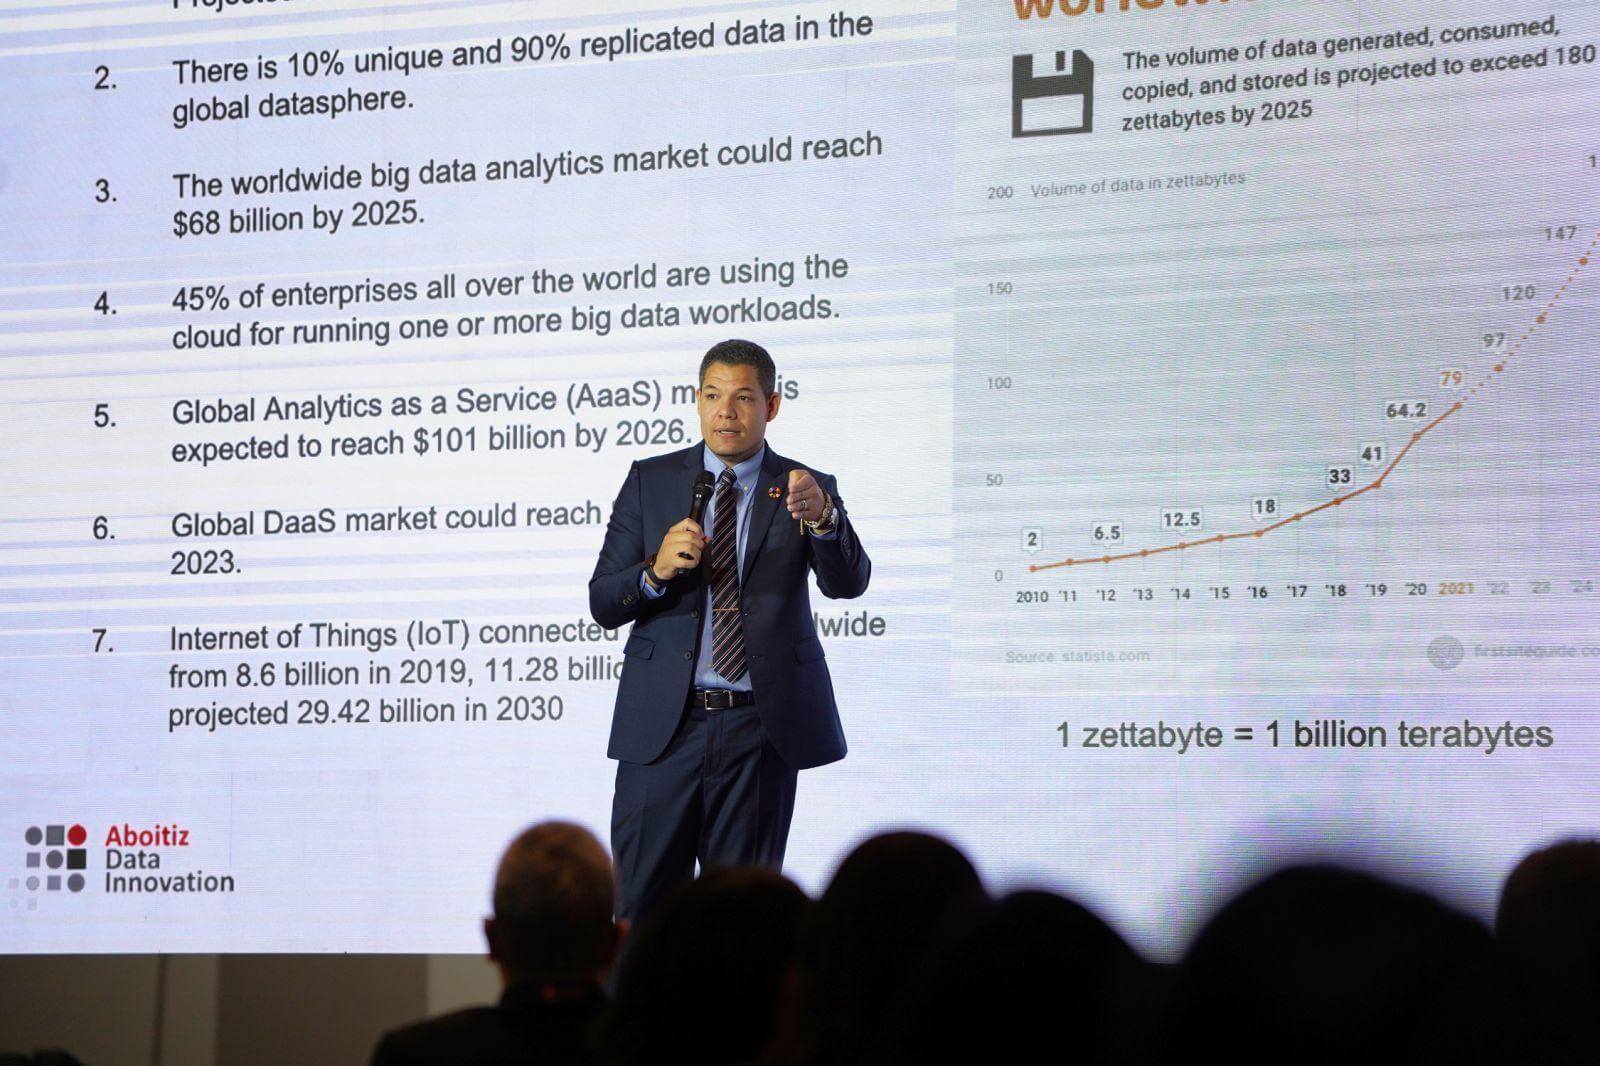 Aboitiz Data Innovation (ADI) Chief Executive Officer (CEO) Dr. David R. Hardoon talks about making AI work for the enterprise during a session at the Asia-Pacific Economic Cooperation (APEC) Business Advisory Council (ABAC) III meeting at the NUSTAR Convention Center in Cebu.